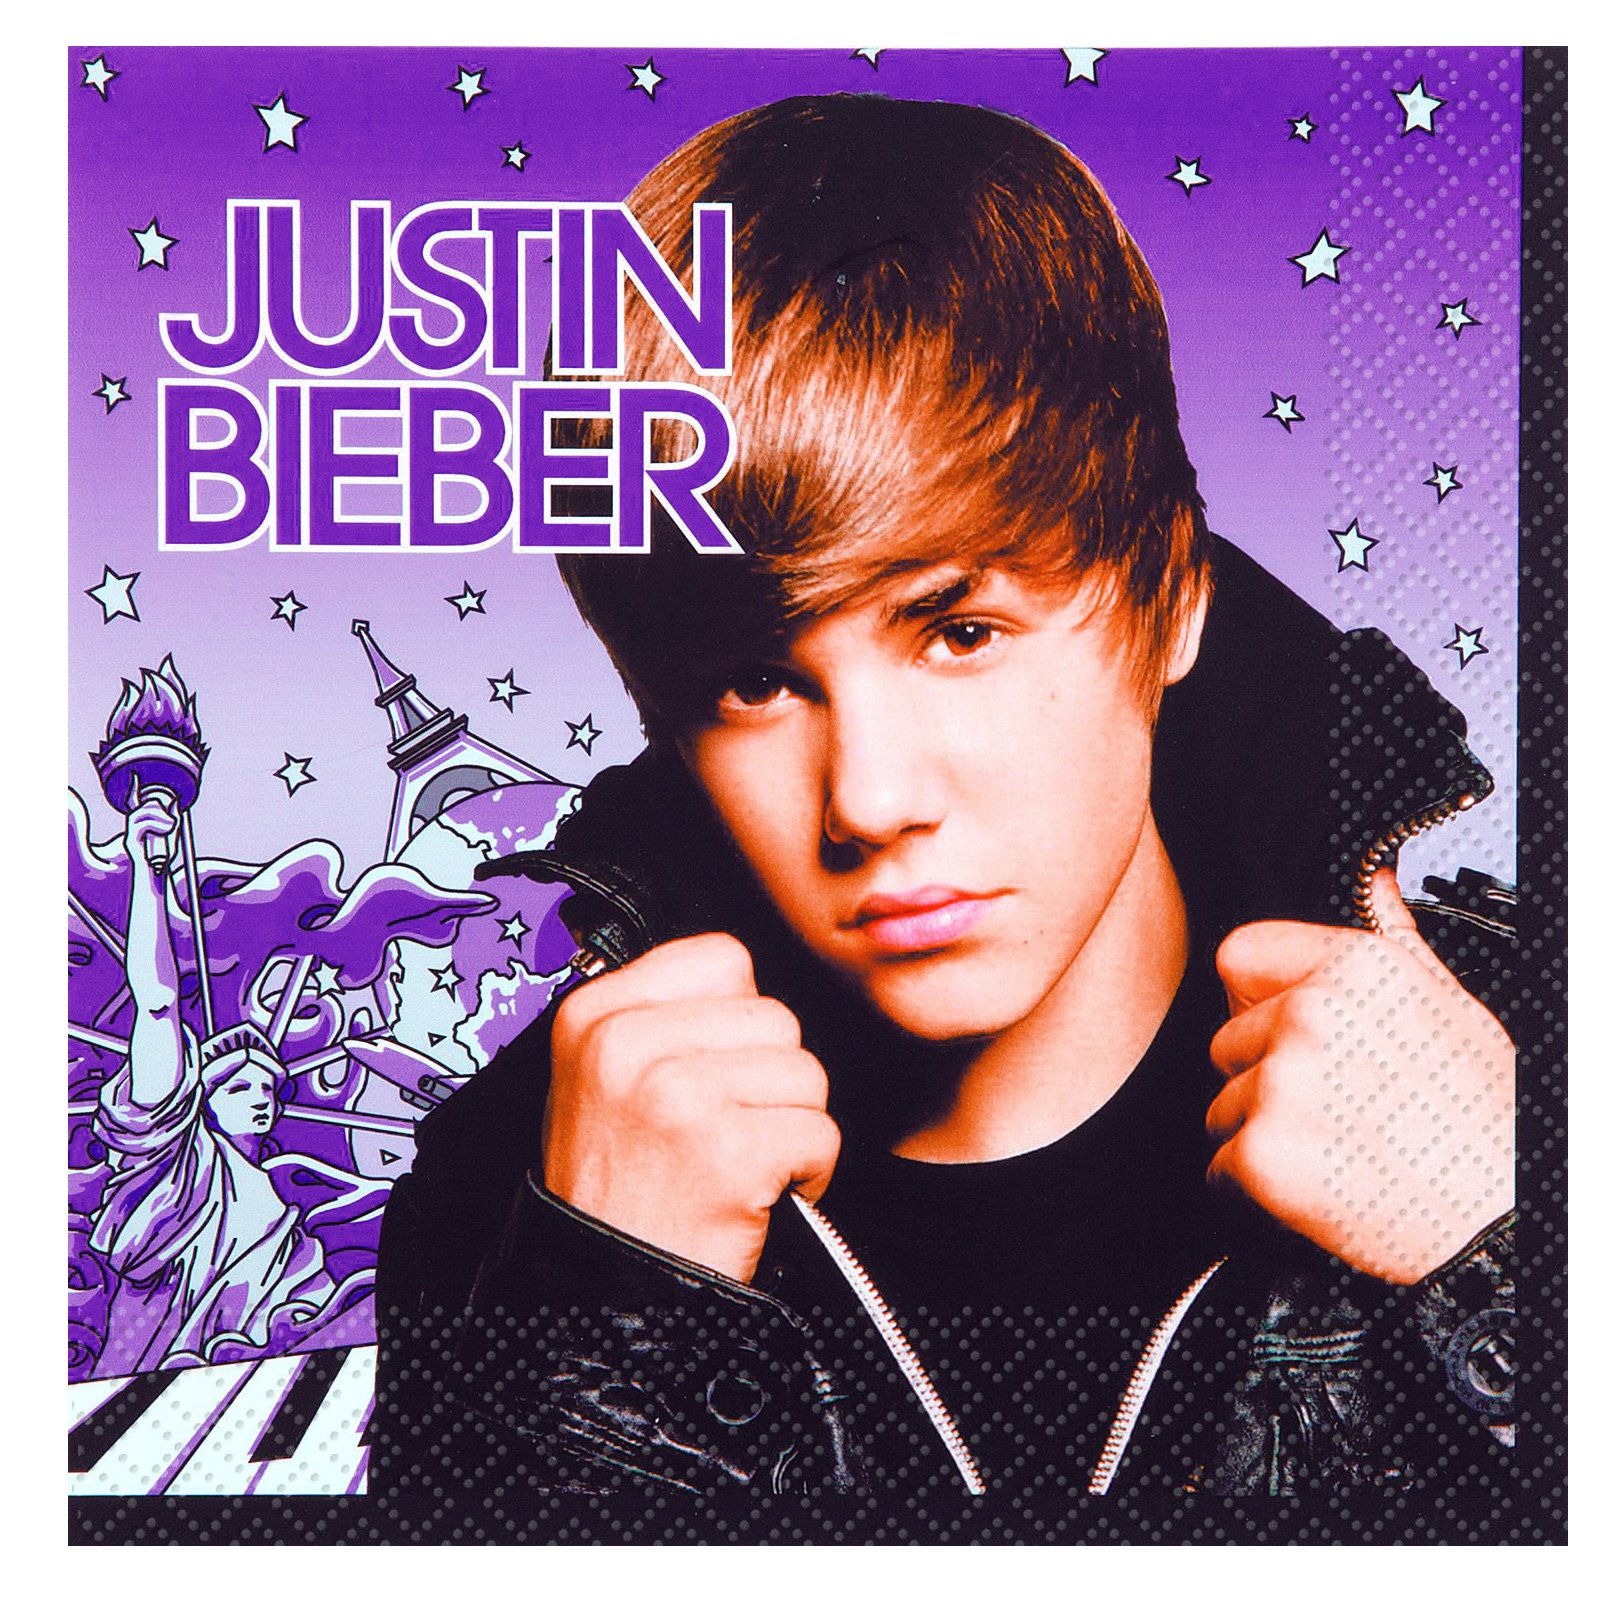 Justin Bieber Lunch Napkins (16 count) - Click Image to Close